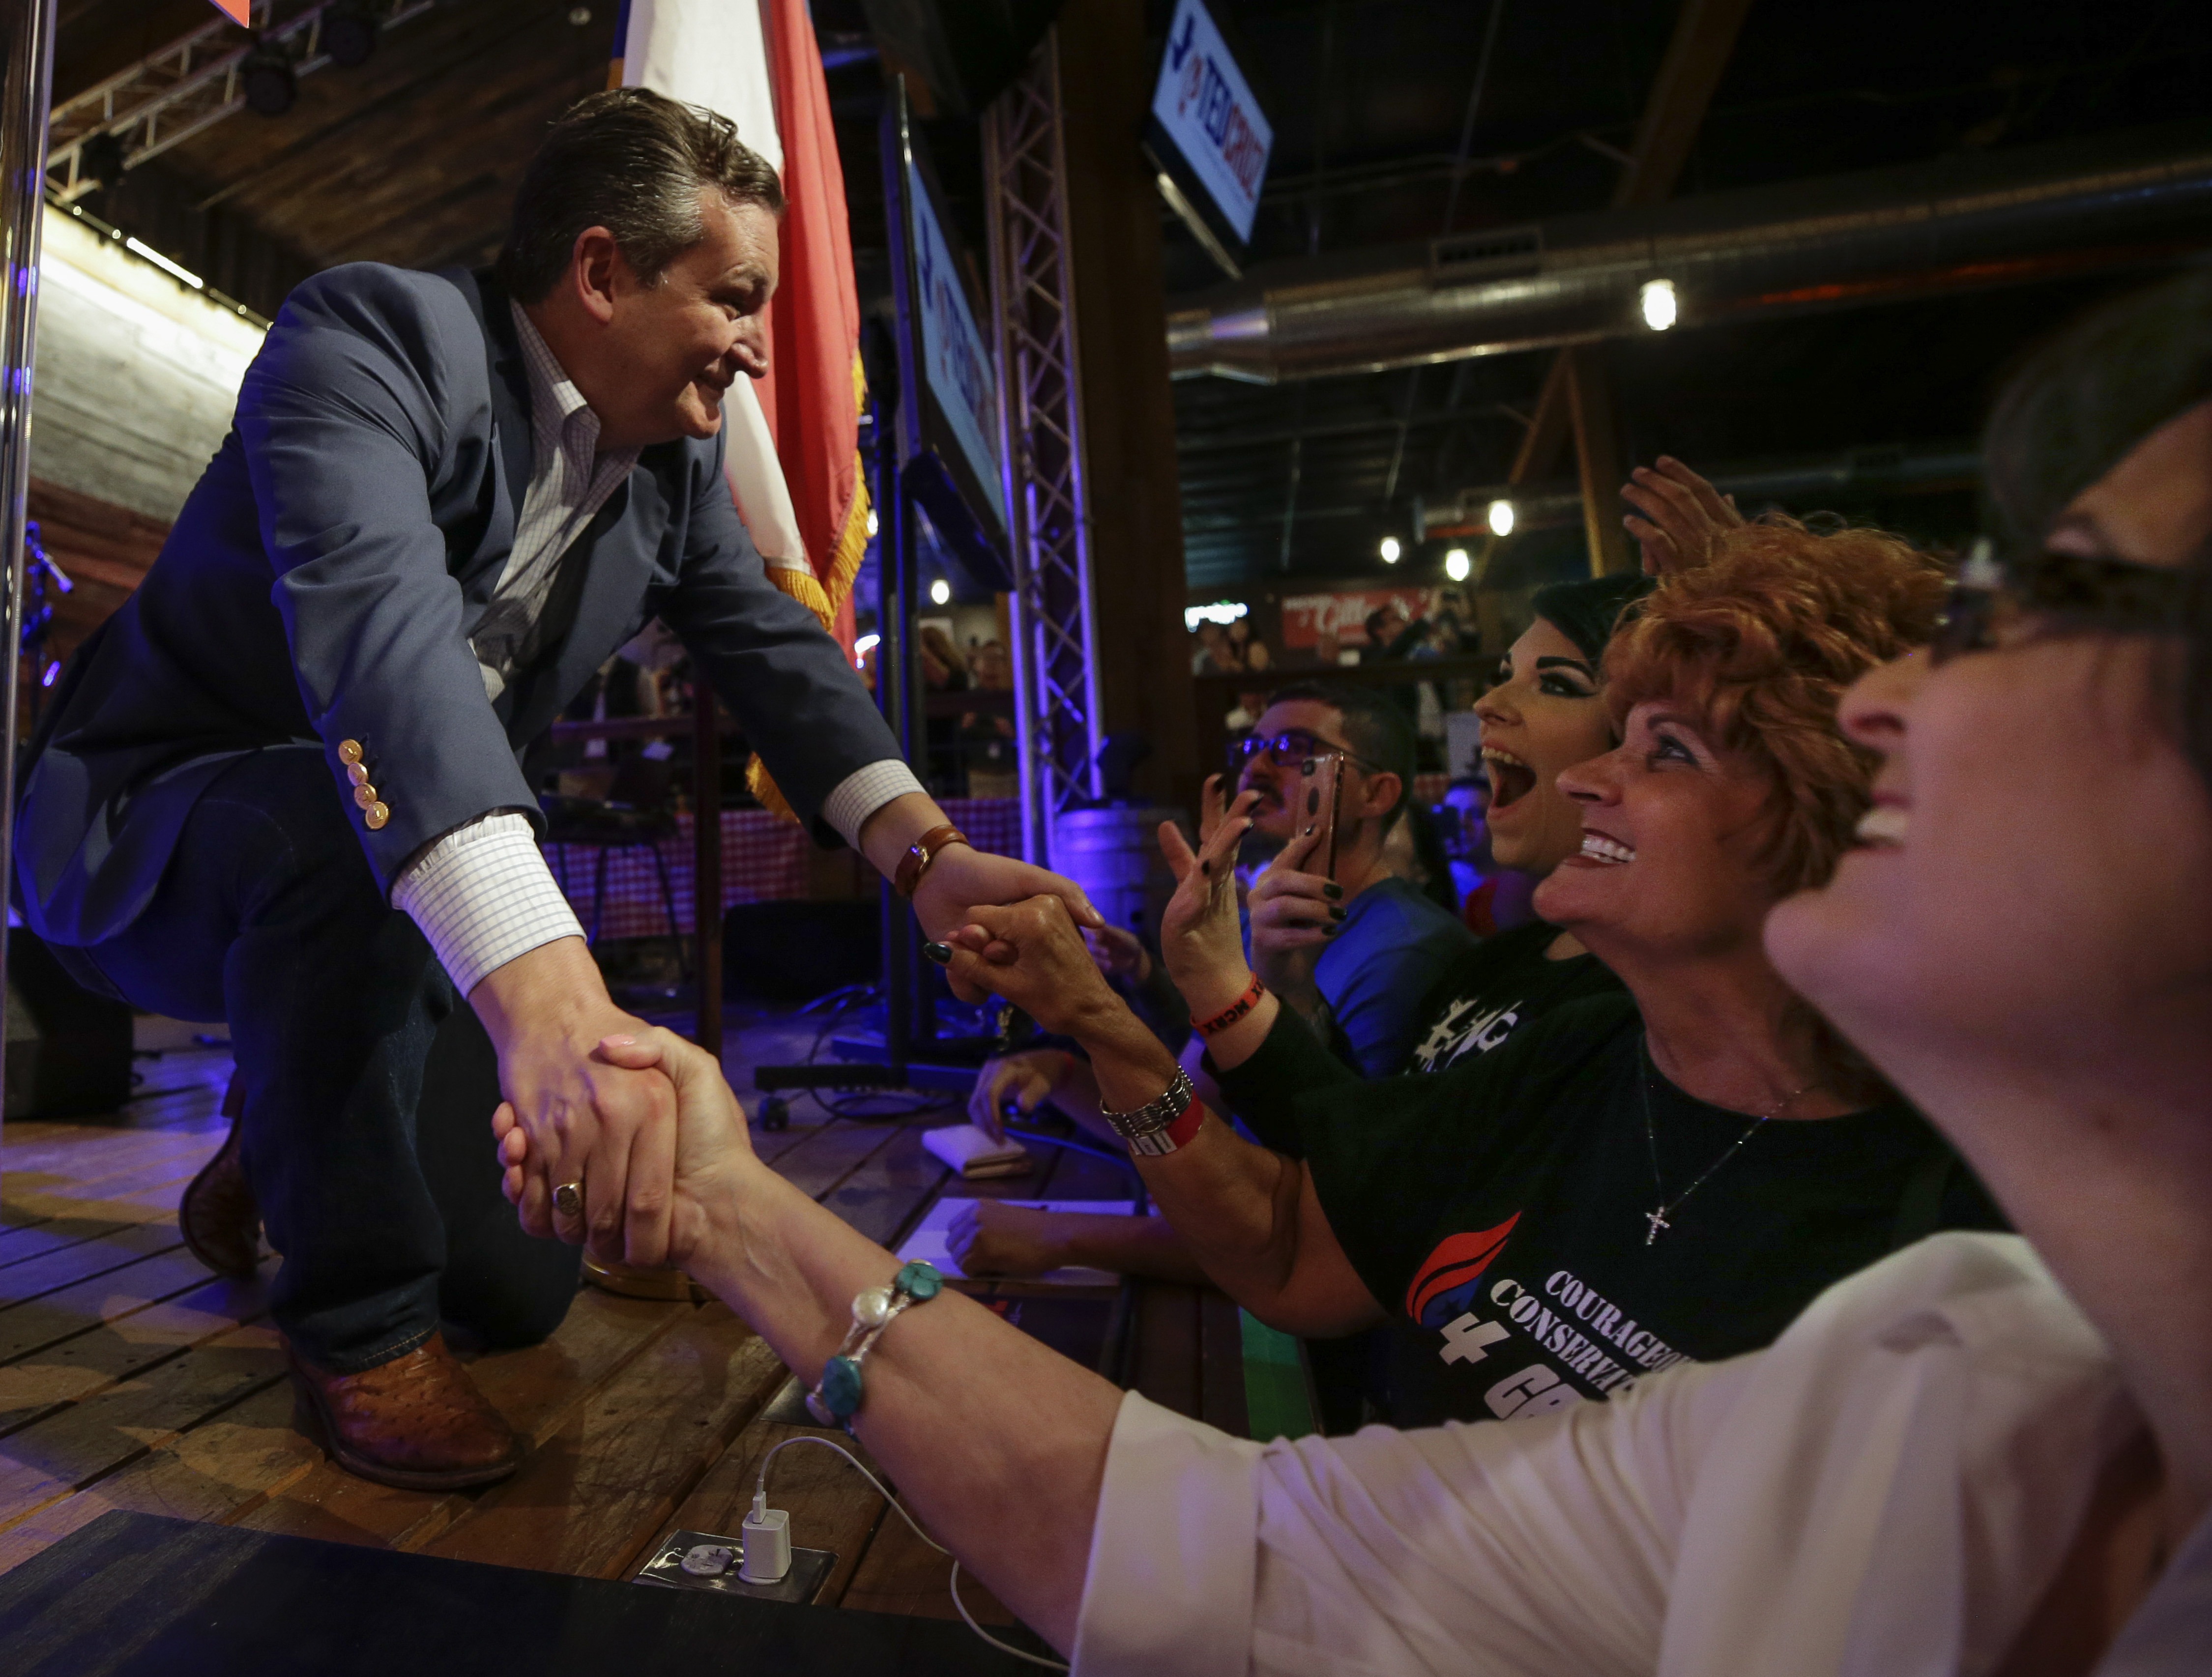 STAFFORD, TX - APRIL 2: Sen. Ted Cruz (R-TX) shakes hands with supporters during a rally to launch his re-election campaign at the Redneck Country Club on April 2, 2018 in Stafford, Texas. Cruz is defending his bid for a second term as Texas' junior senator against Democratic U.S. Rep. Beto O'Rourke. (Photo by Erich Schlegel/Getty Images)